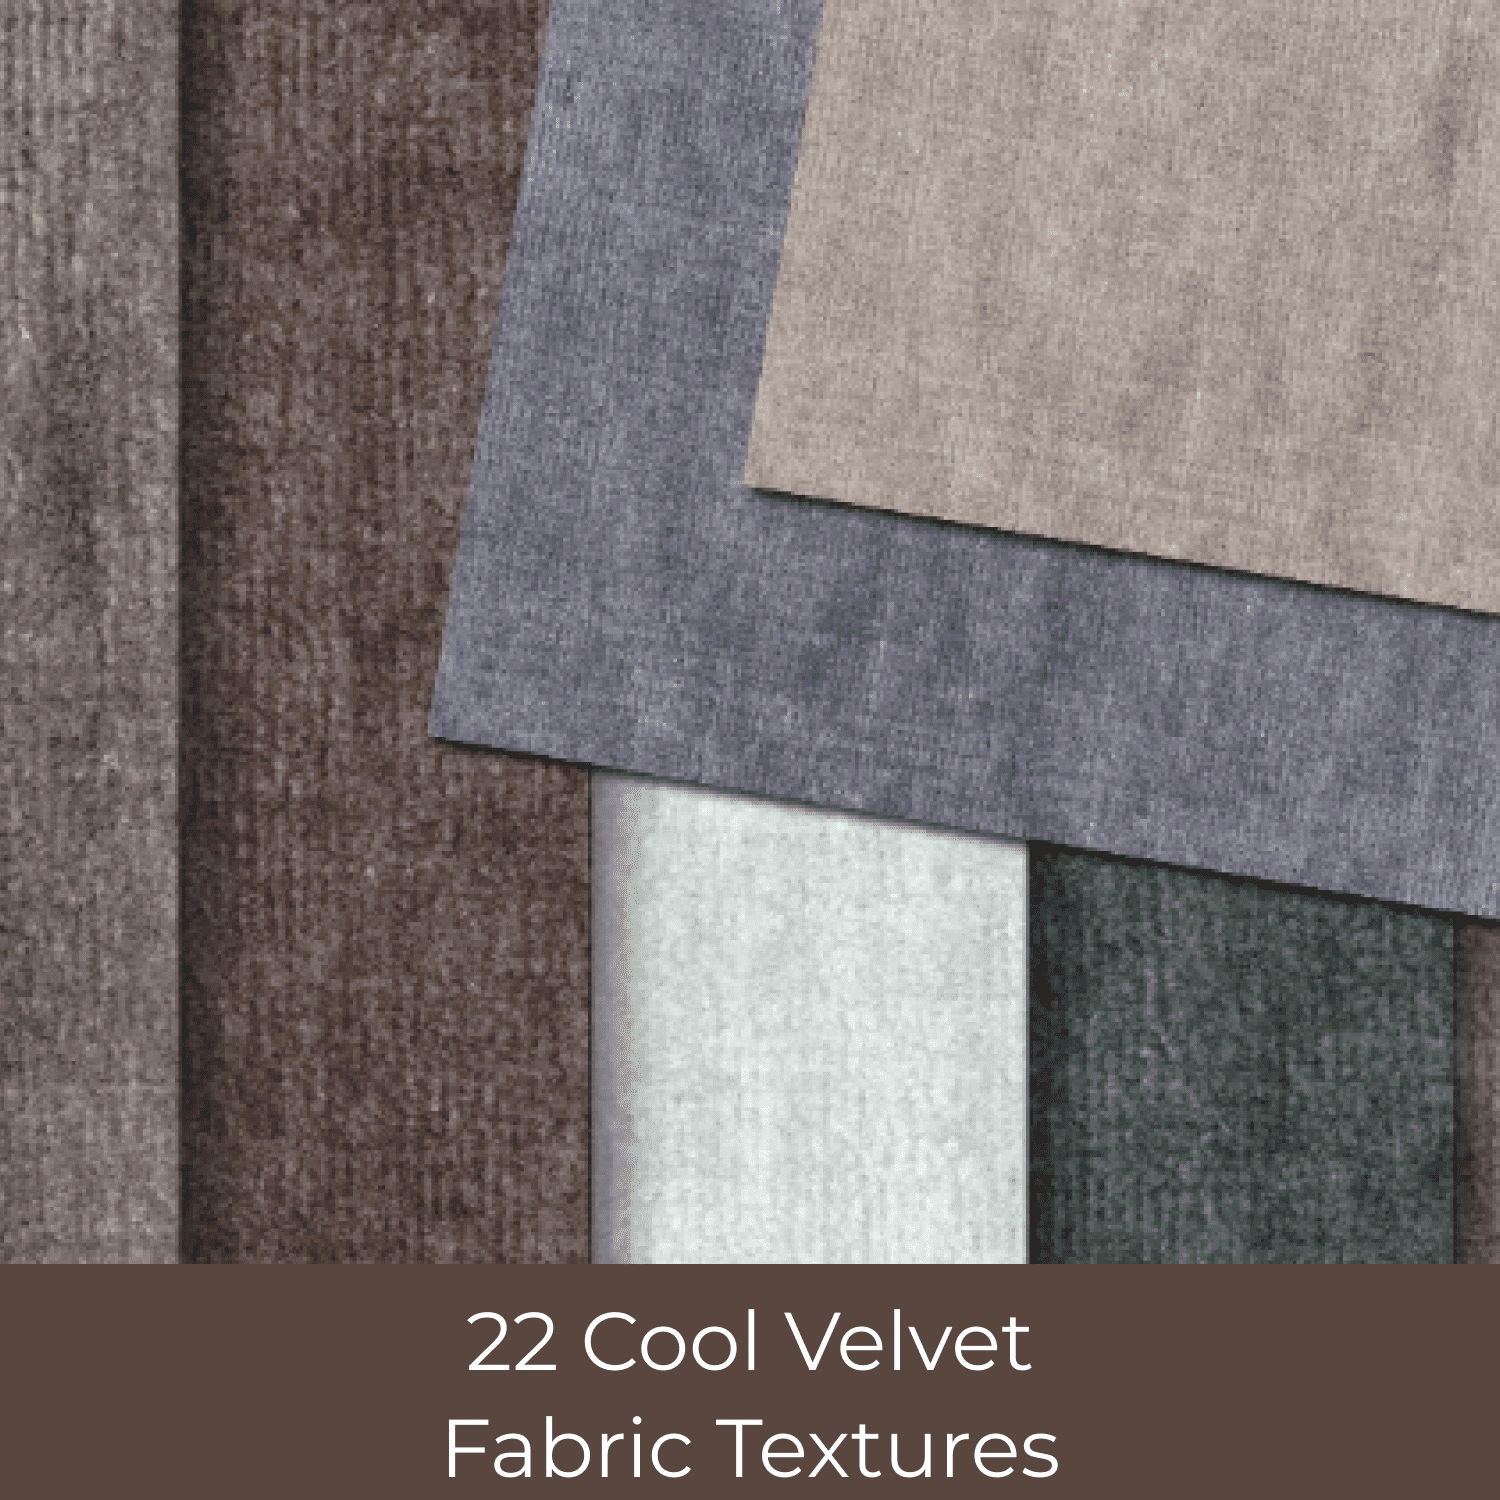 22 Cool Velvet Fabric Textures cover.